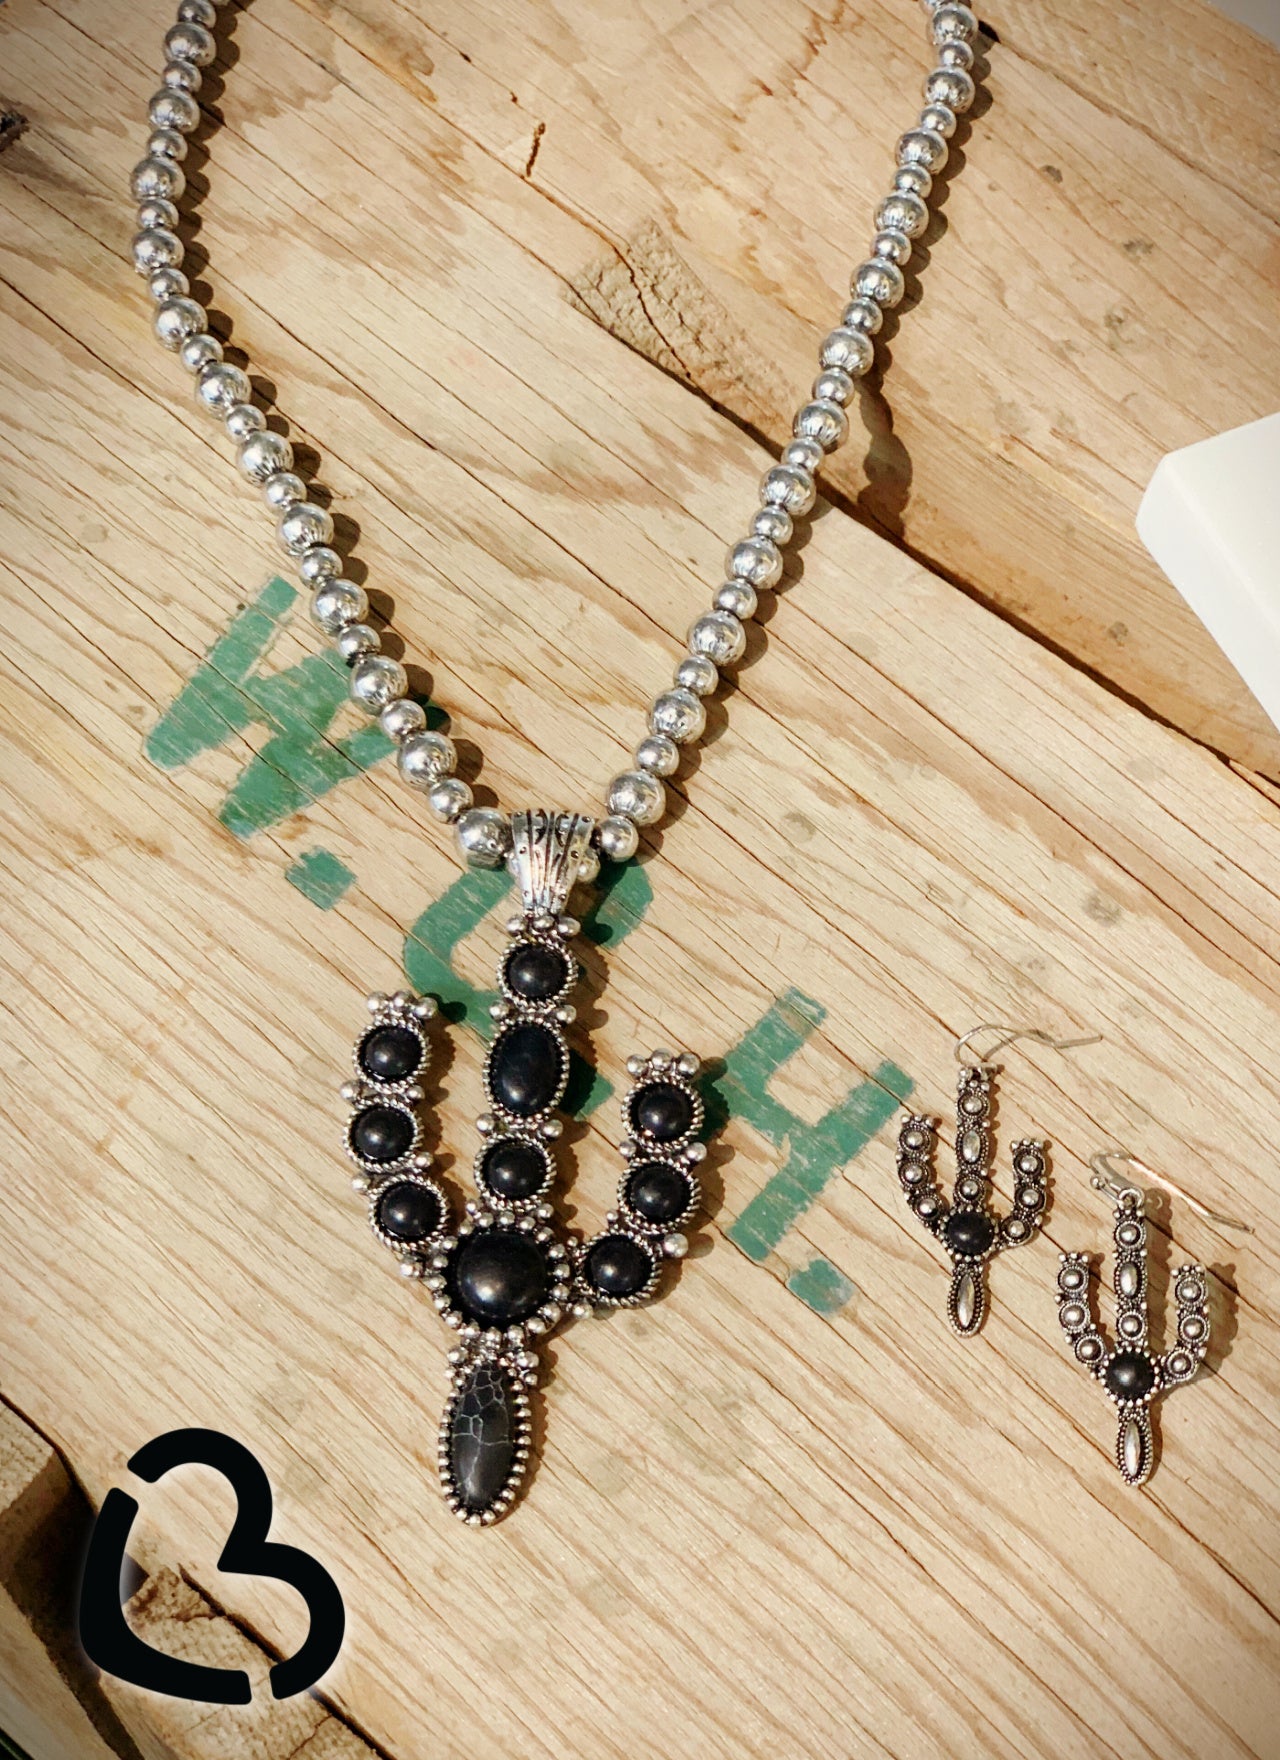 The Celina Cactus Necklace in Black Jewelry 19 